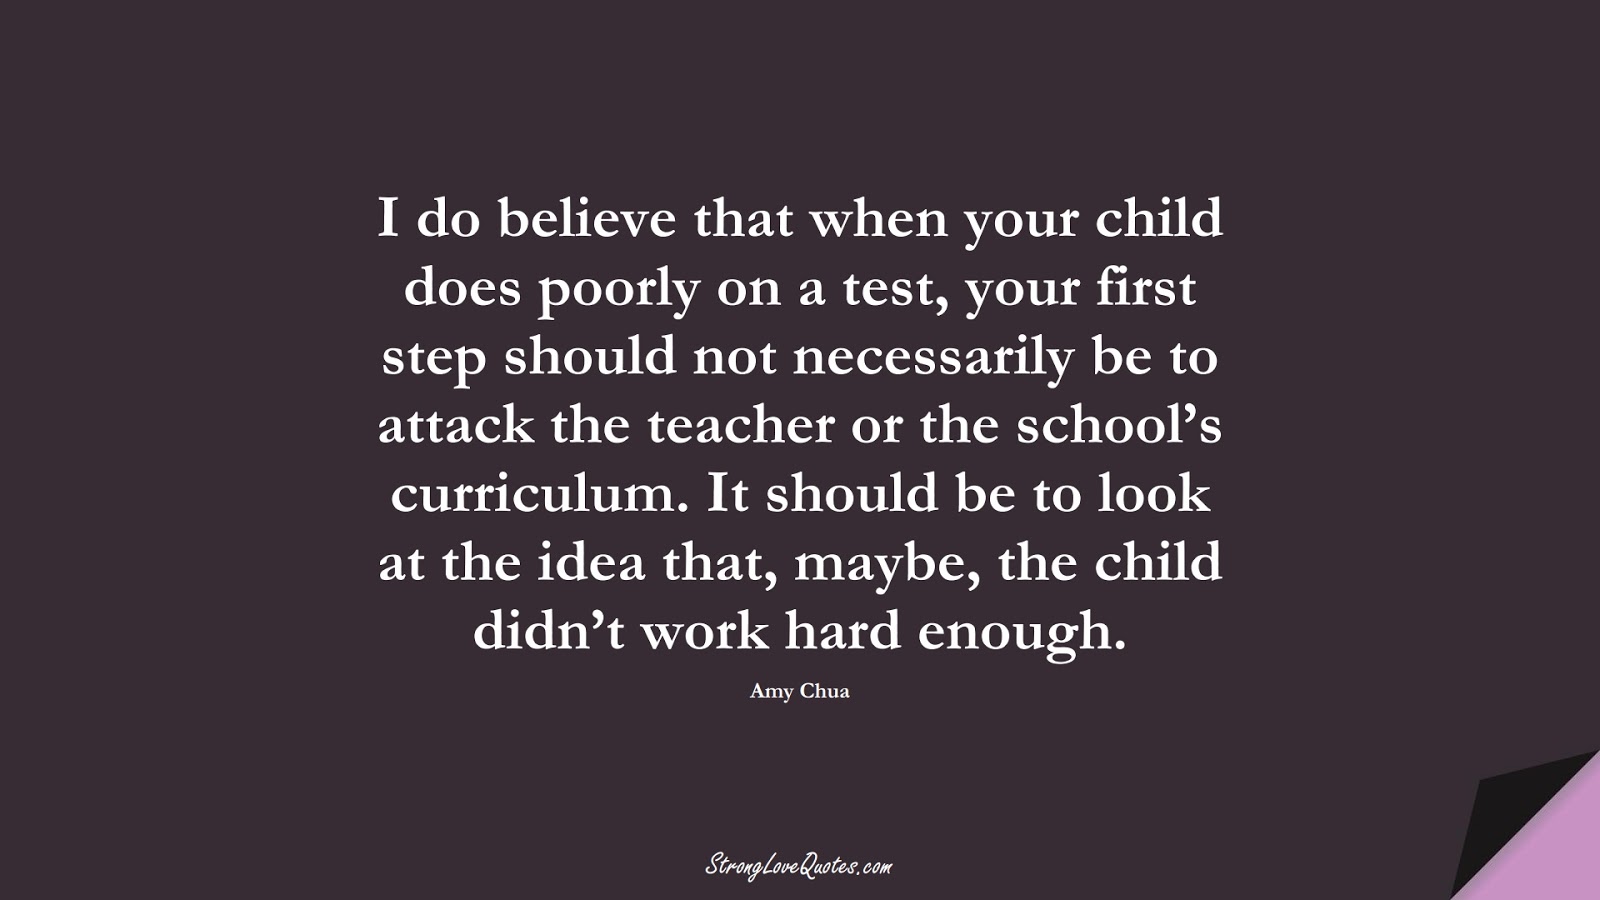 I do believe that when your child does poorly on a test, your first step should not necessarily be to attack the teacher or the school’s curriculum. It should be to look at the idea that, maybe, the child didn’t work hard enough. (Amy Chua);  #EducationQuotes